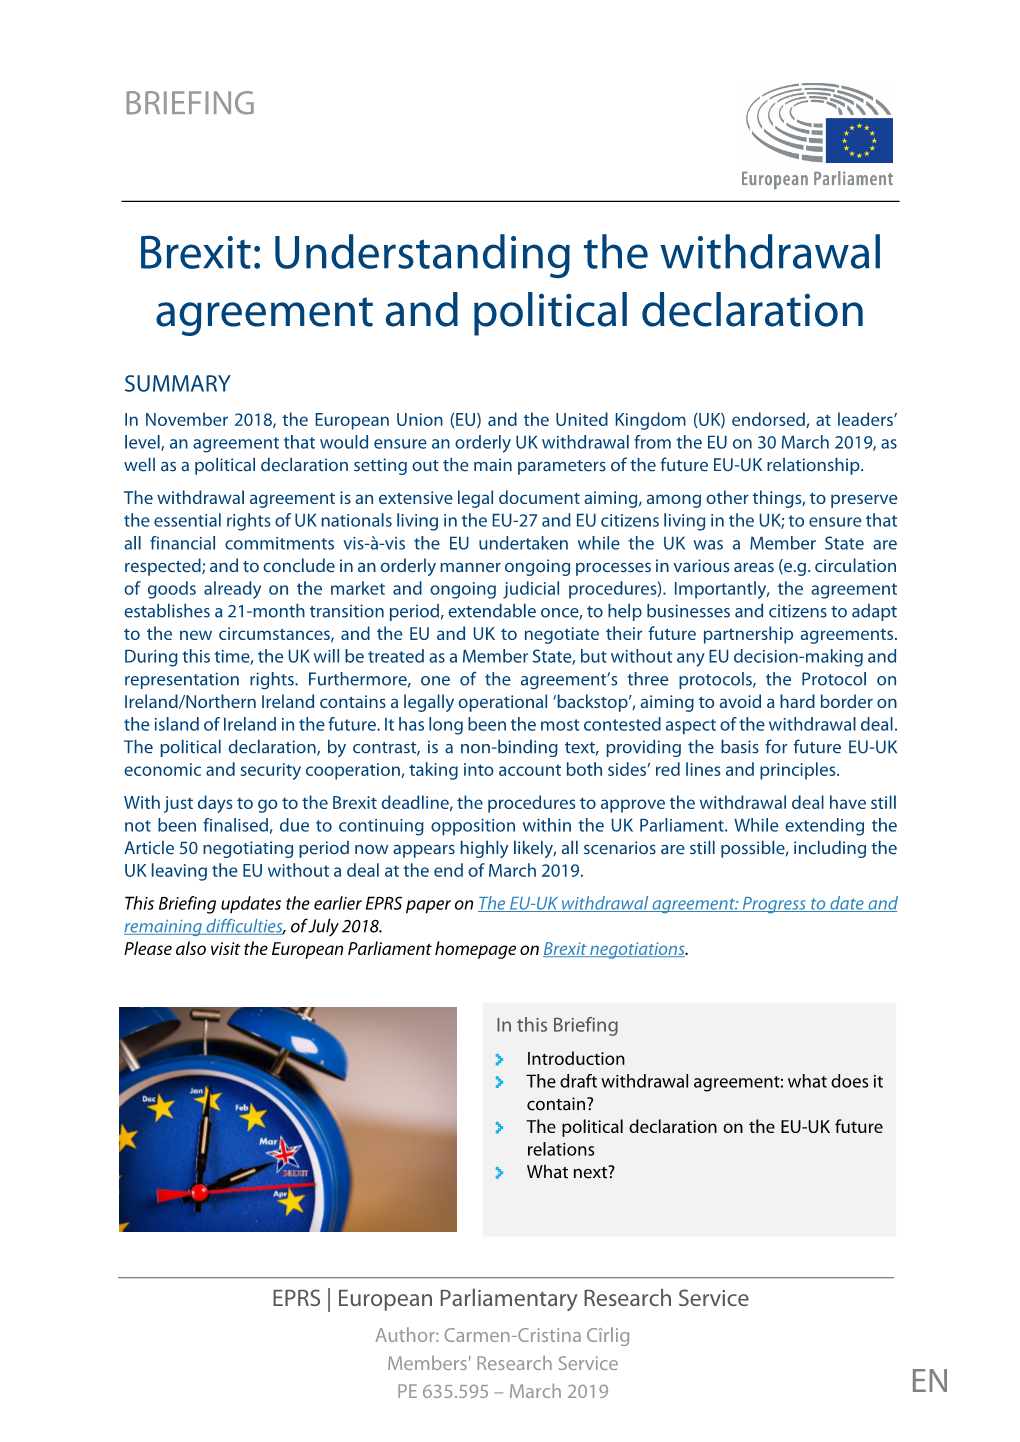 Brexit: Understanding the Withdrawal Agreement and the Political Declaration